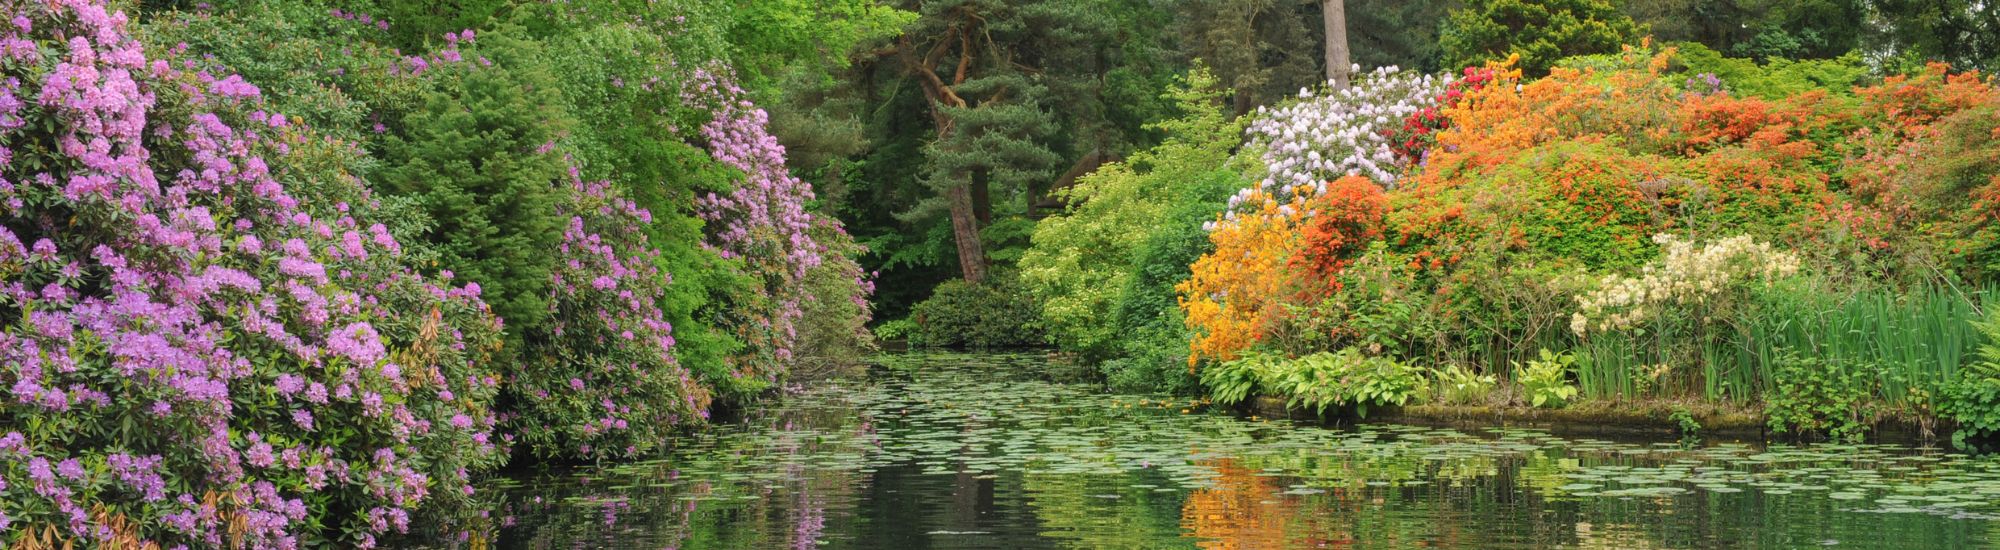 tourhub | Just Go Holidays | Charming Cheshire, Tatton Park & Border Towns of North Wales 